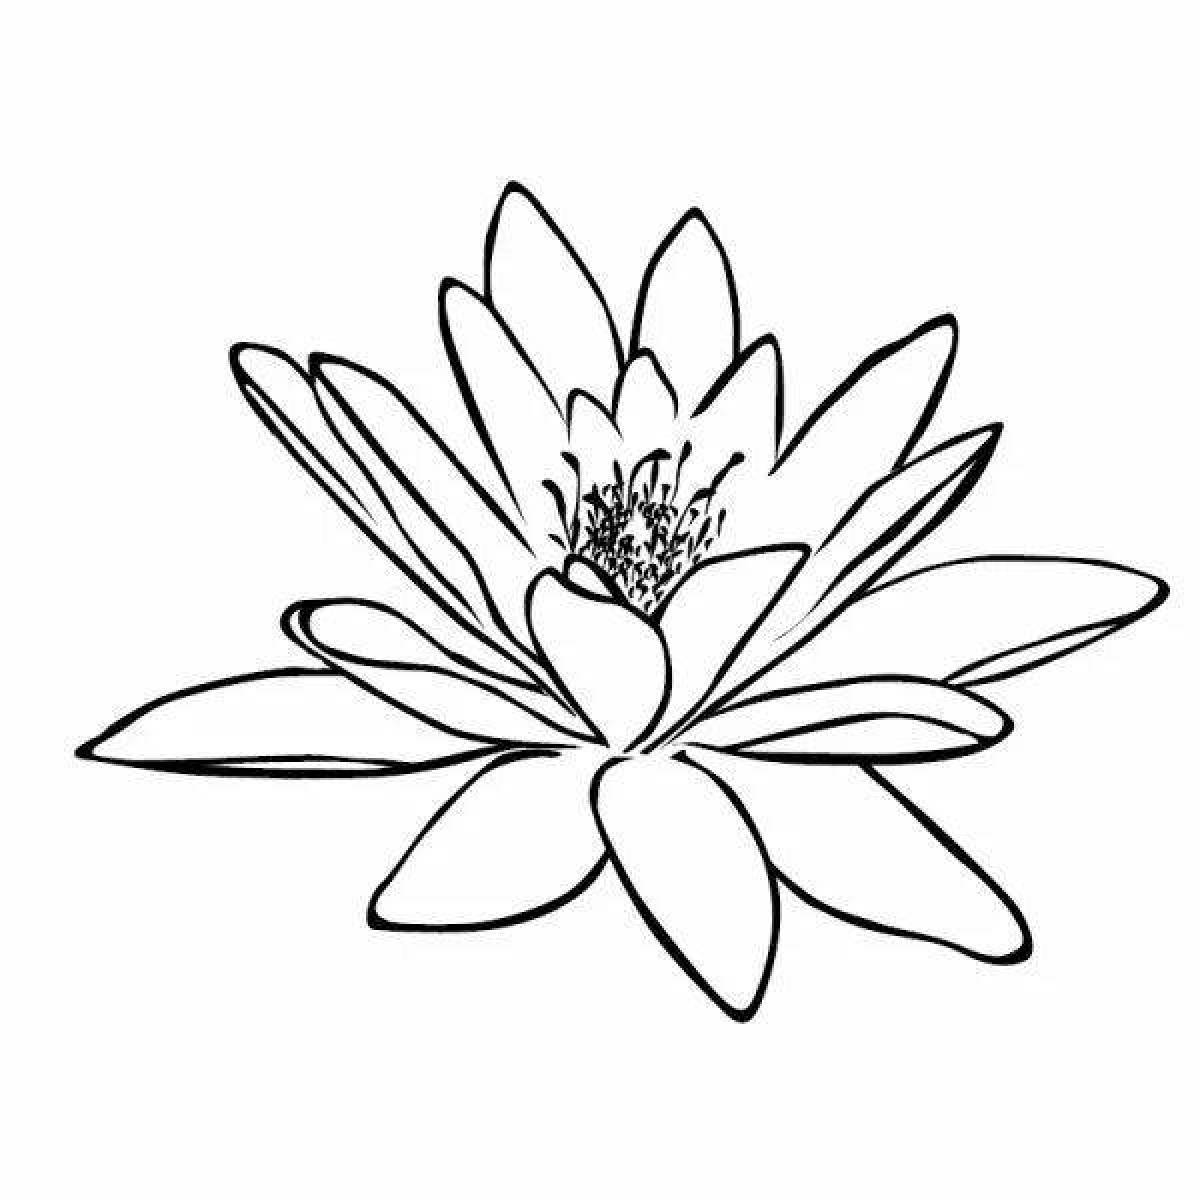 Colouring serene water lily